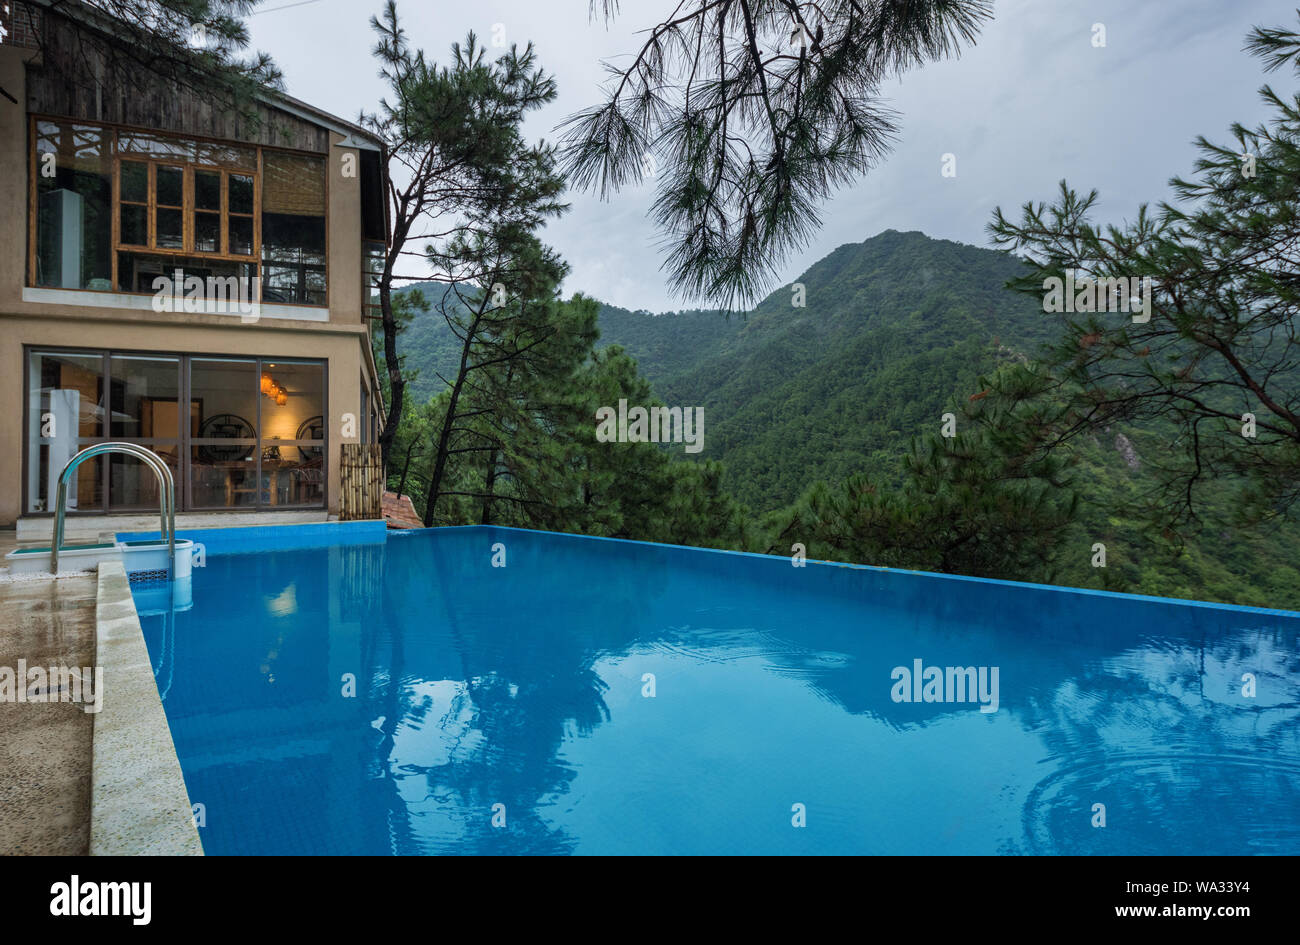 Home stay facility swimming pool in the mountains Stock Photo